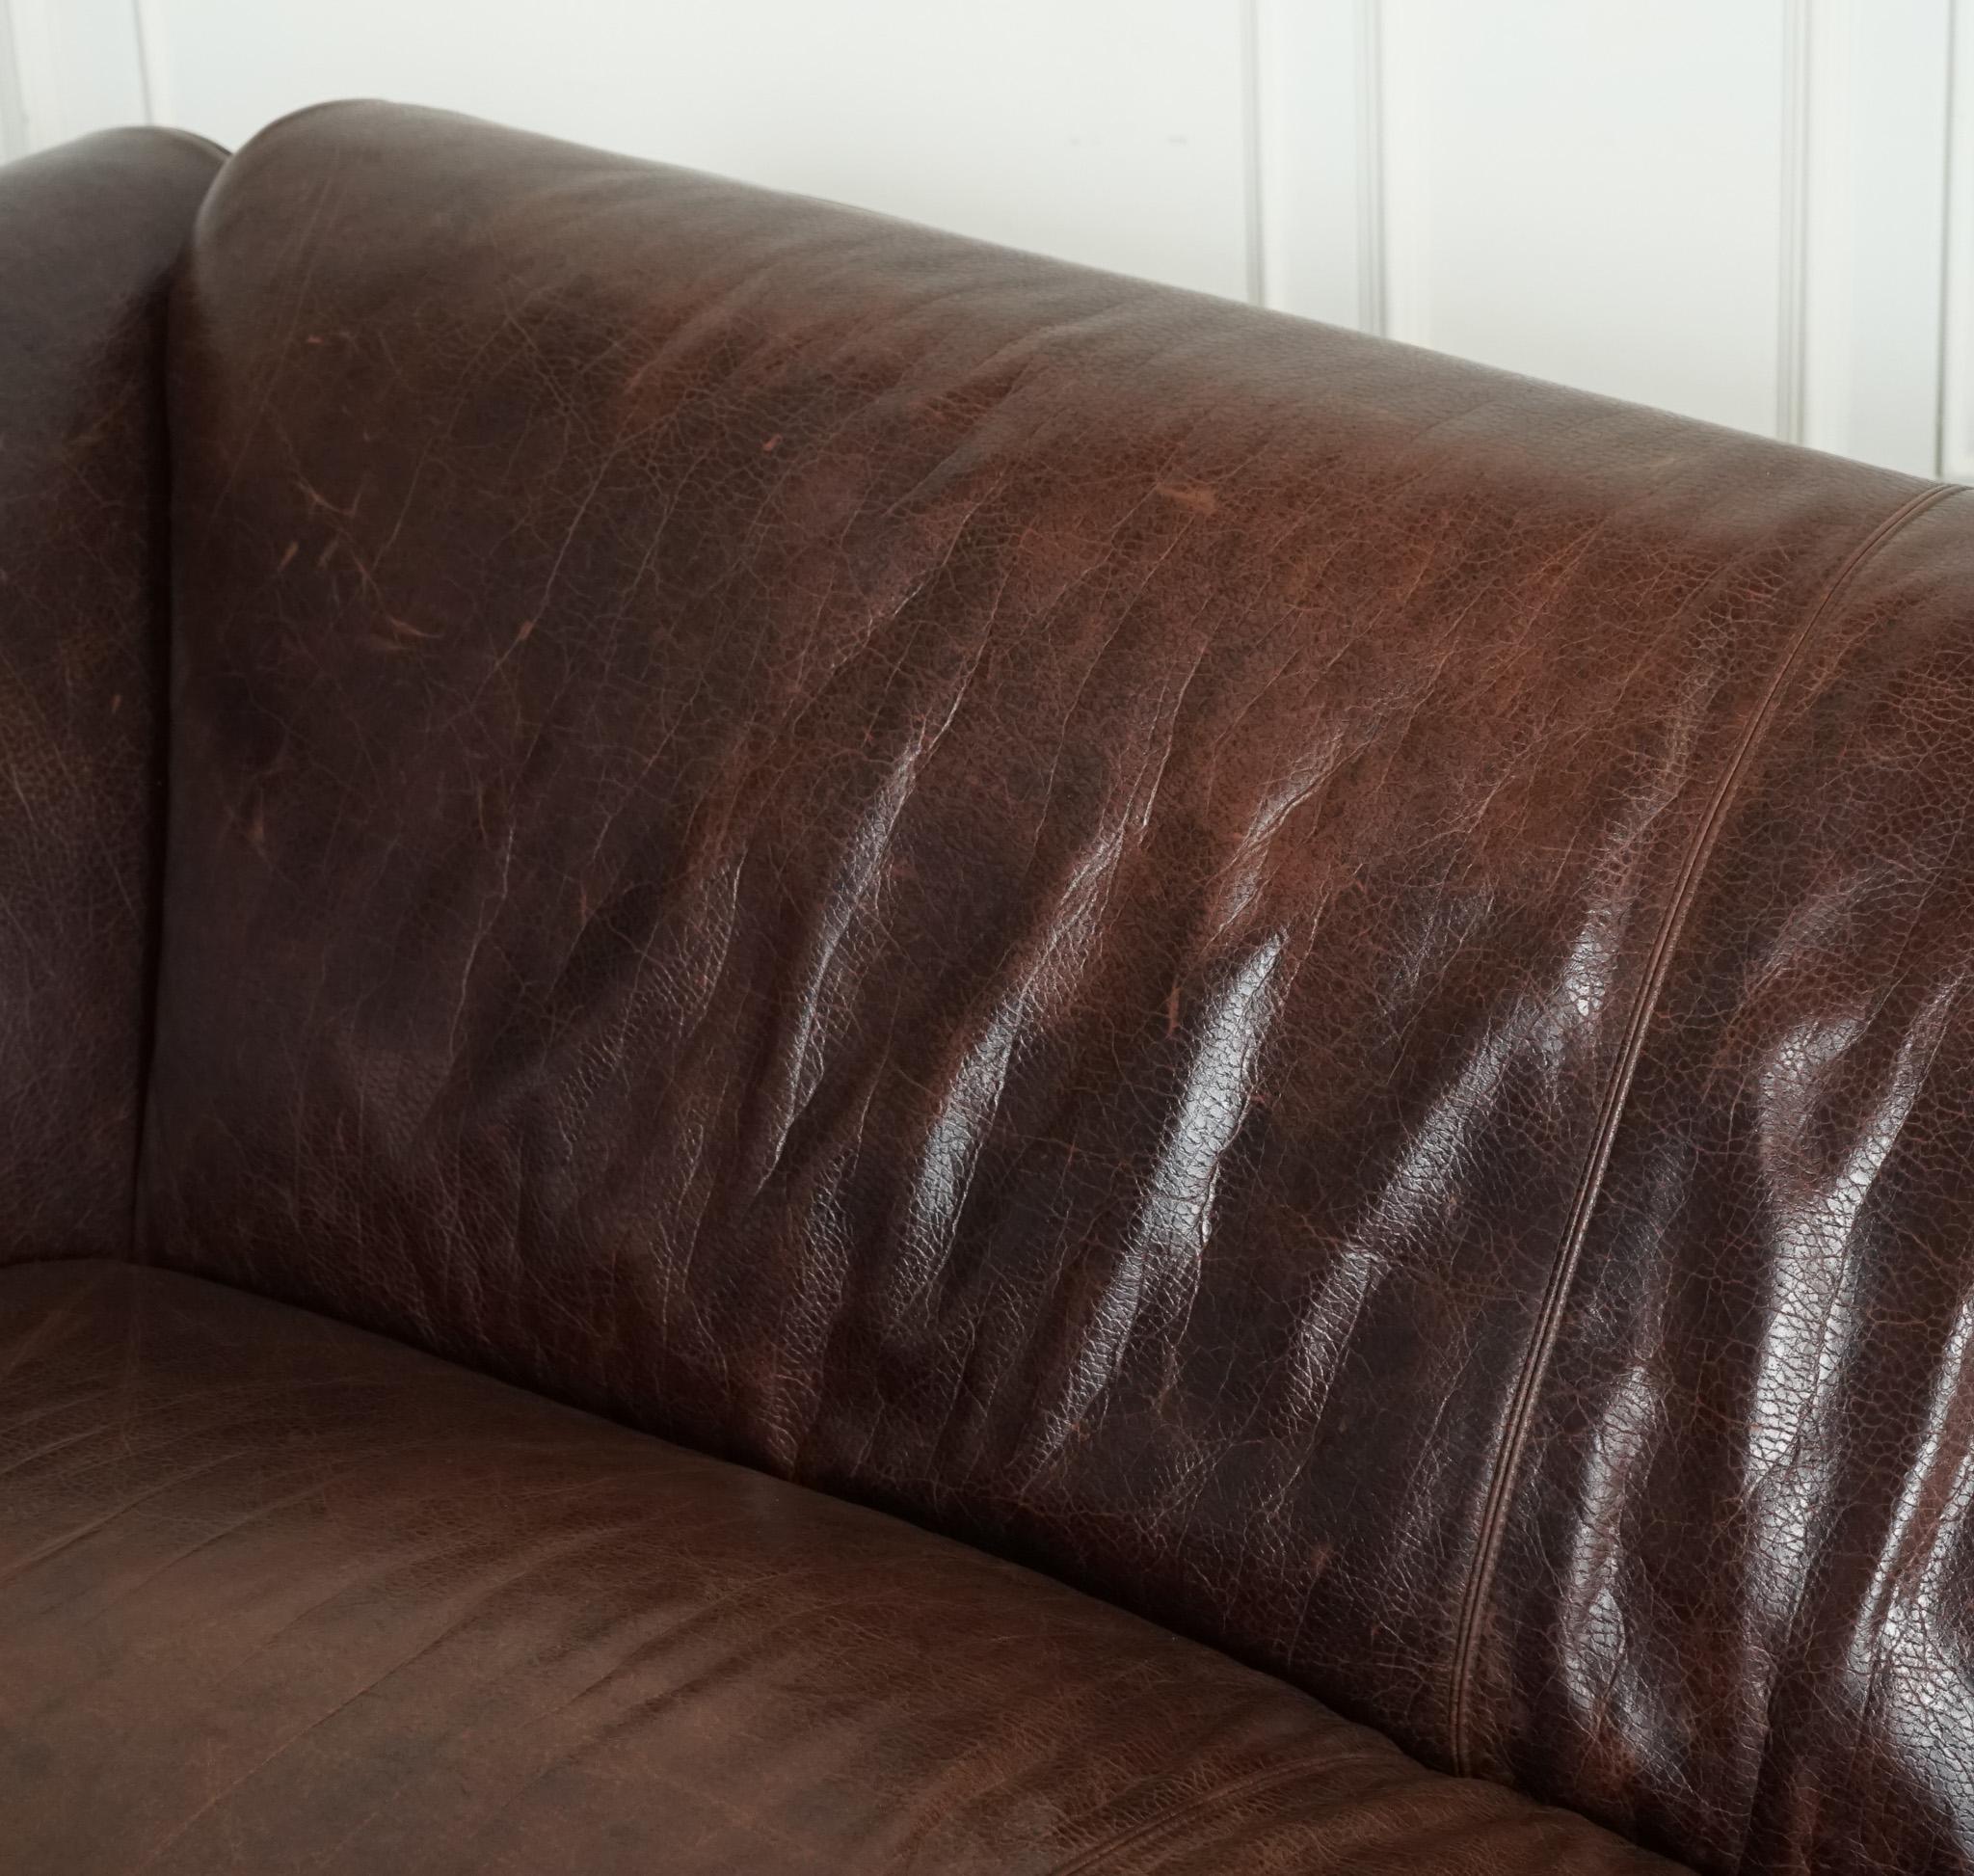 STUNNING FISHPOOLS HERiTAGE BROWN LEATHER 2 TO 3 SEATER SOFA For Sale 5